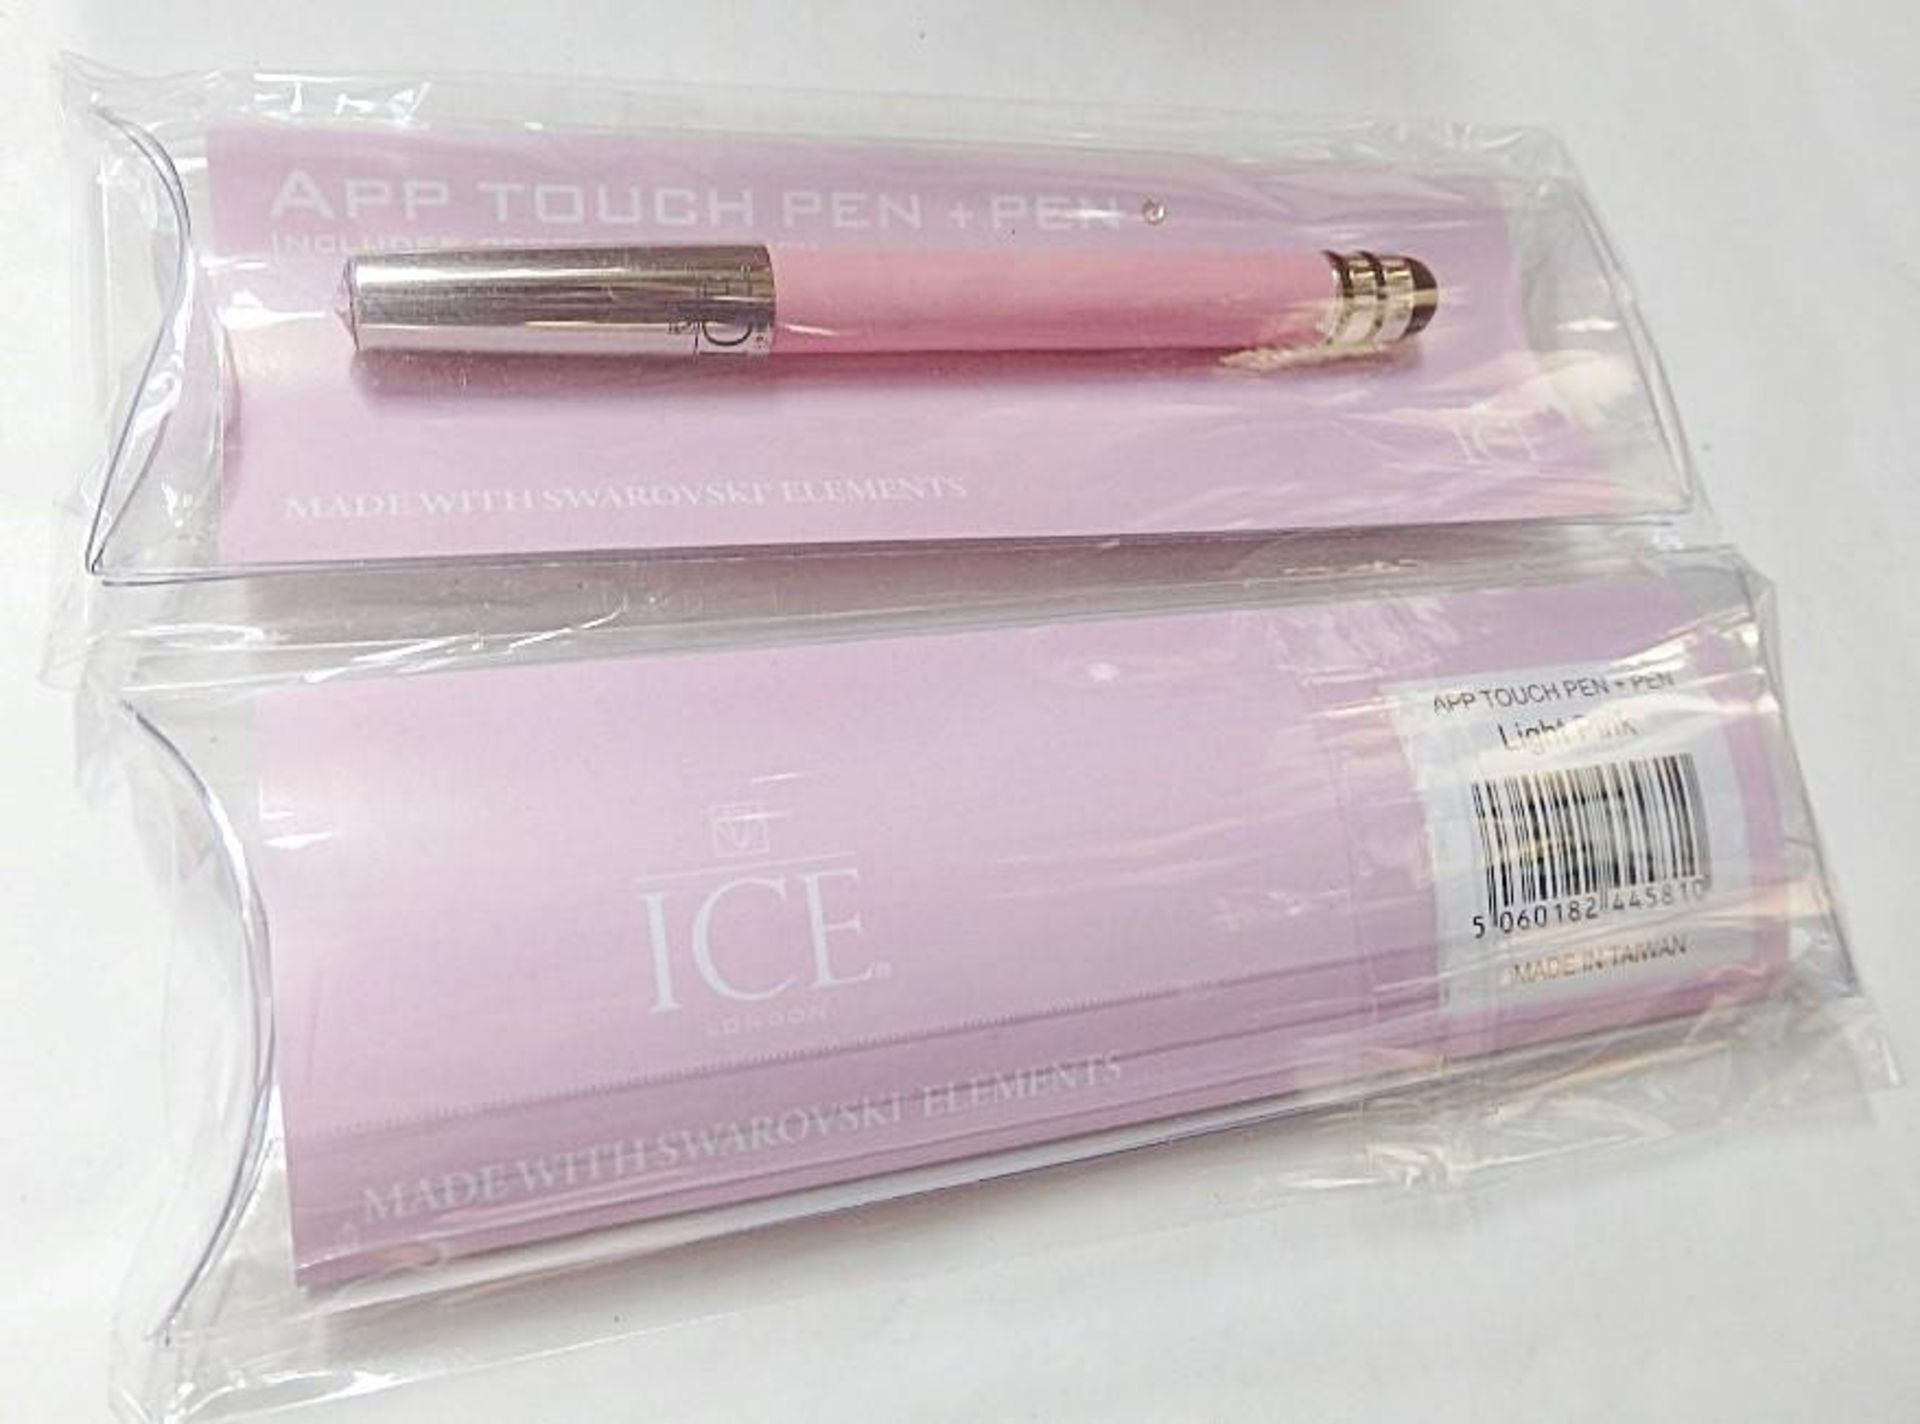 10 x ICE LONDON App Pen Duo - Touch Stylus And Ink Pen Combined - Colour: LIGHT PINK - MADE WITH - Image 2 of 6